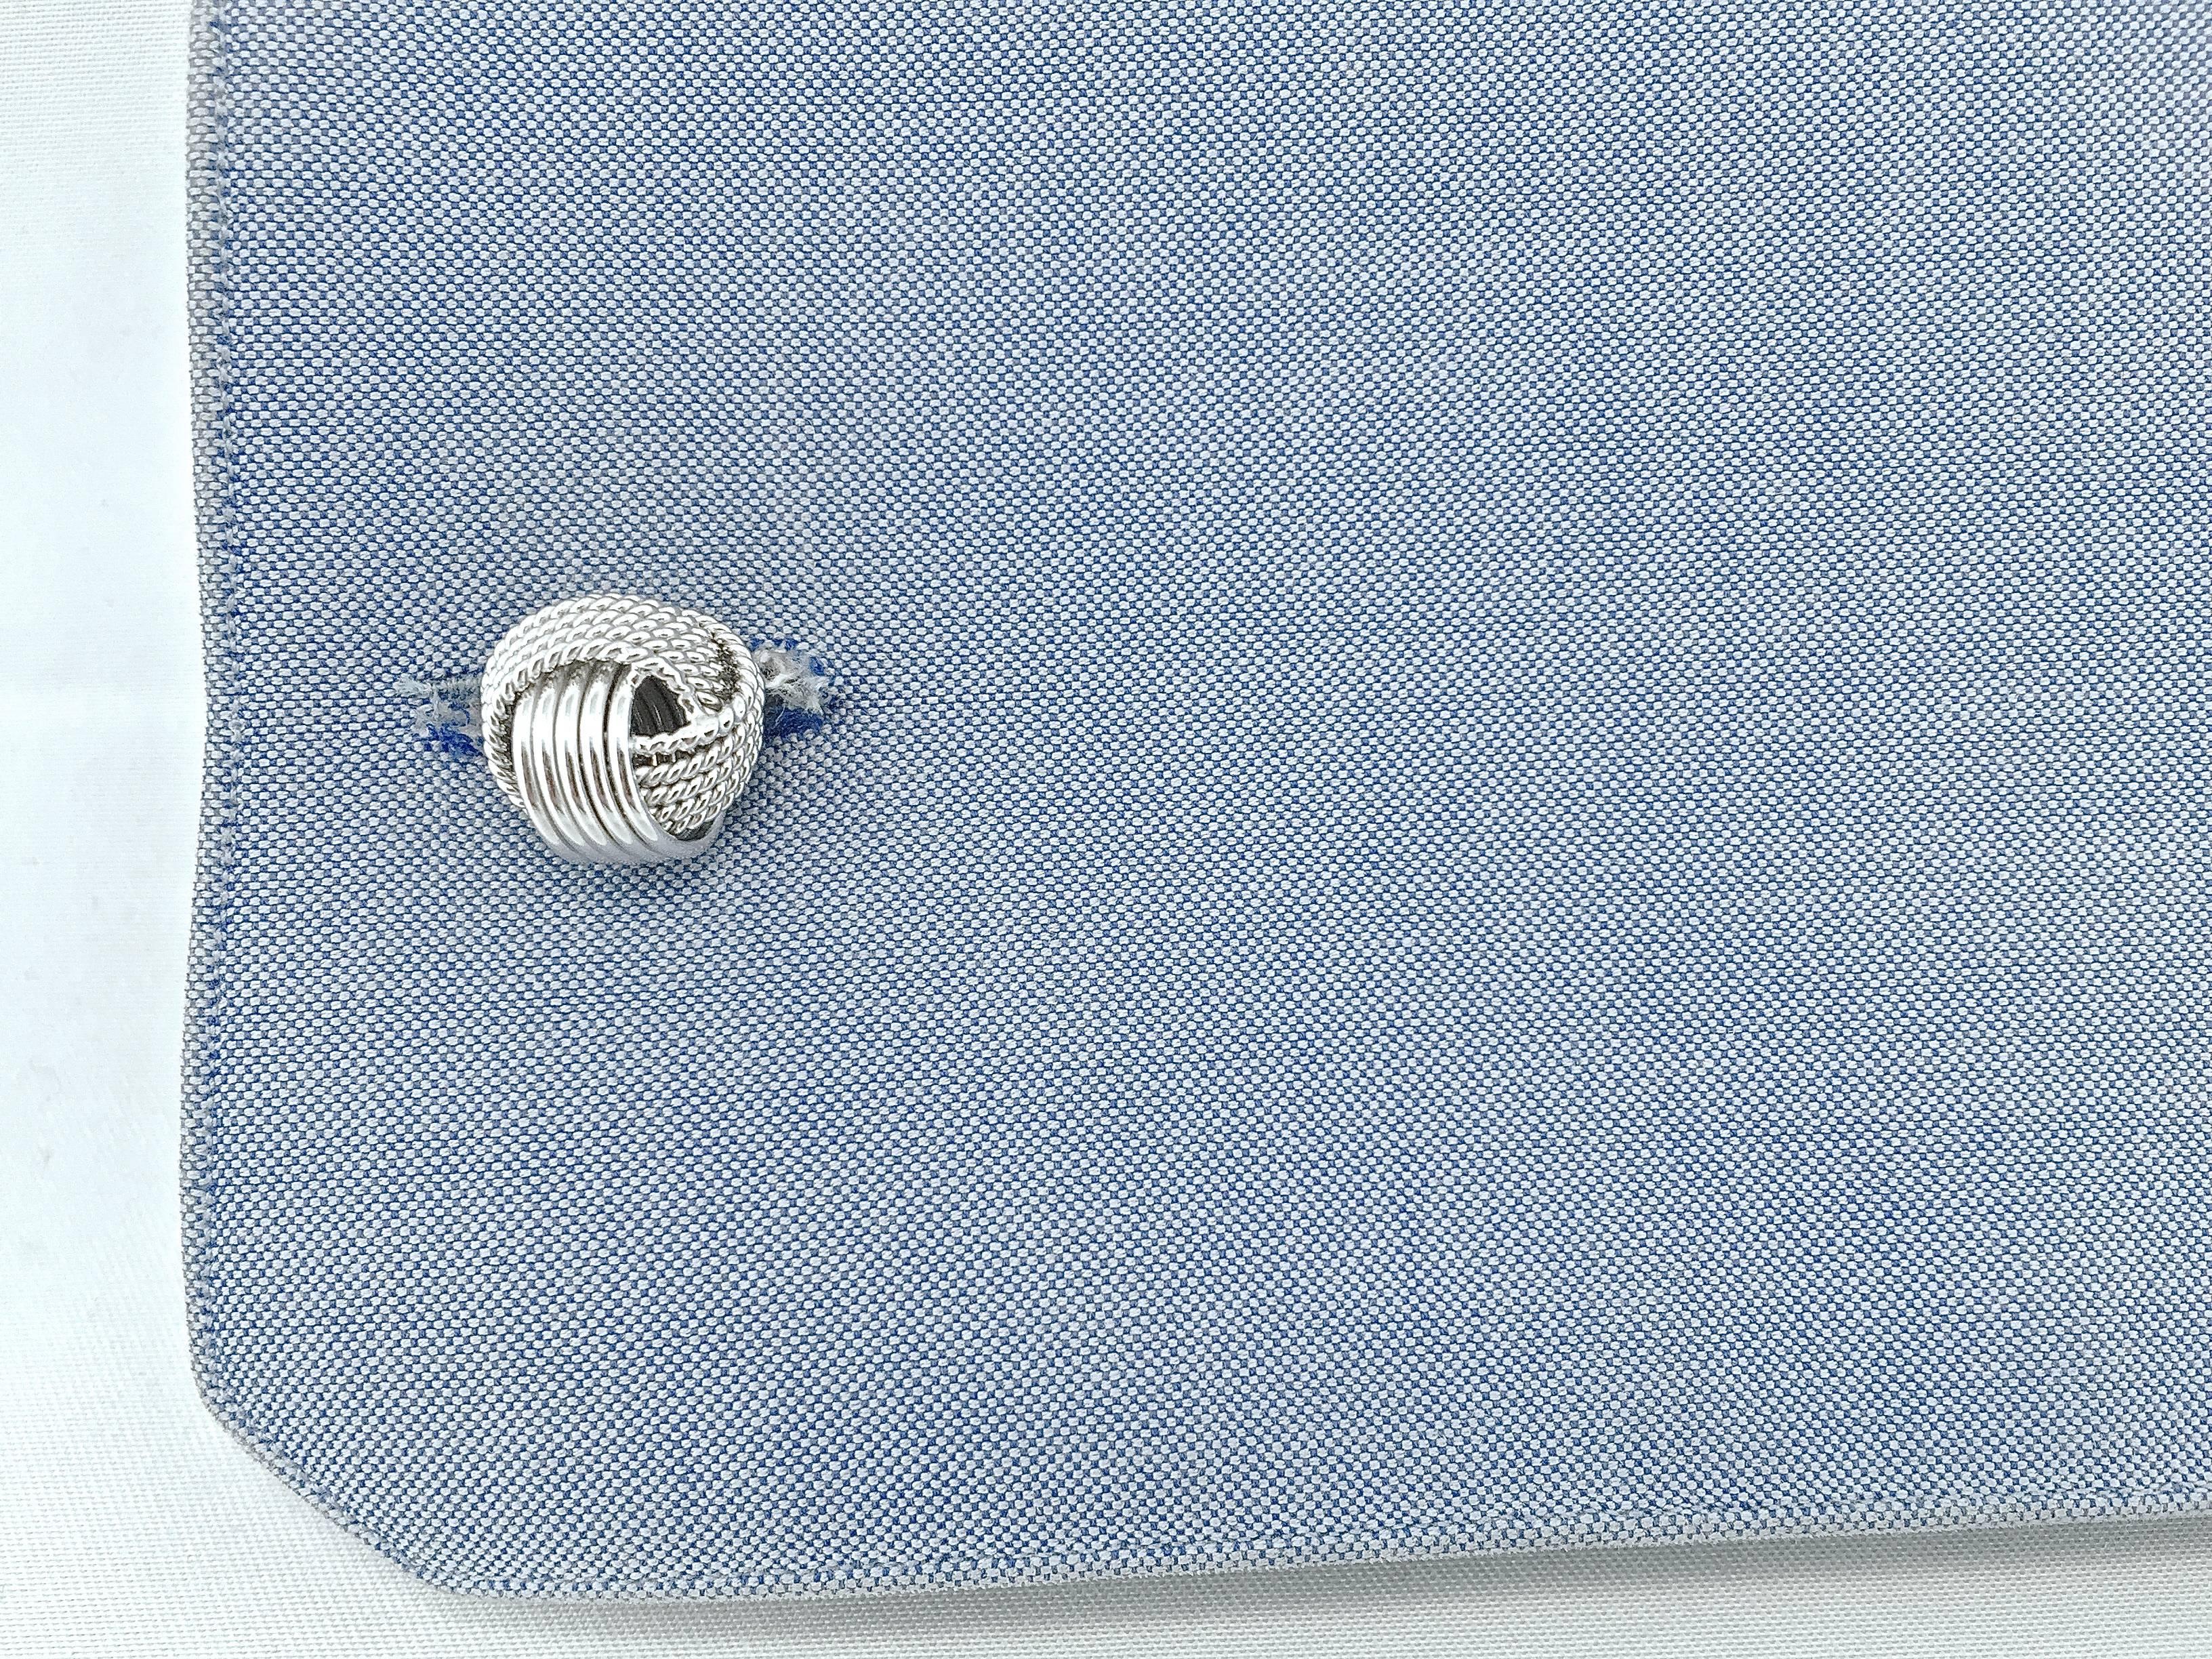 Alex Jona design collection, hand crafted in Italy, Sterling silver knot cufflinks. Marked JONA 925.  
Alex Jona cufflinks stand out, not only for their special design and for the excellent quality, but also for the careful attention given to